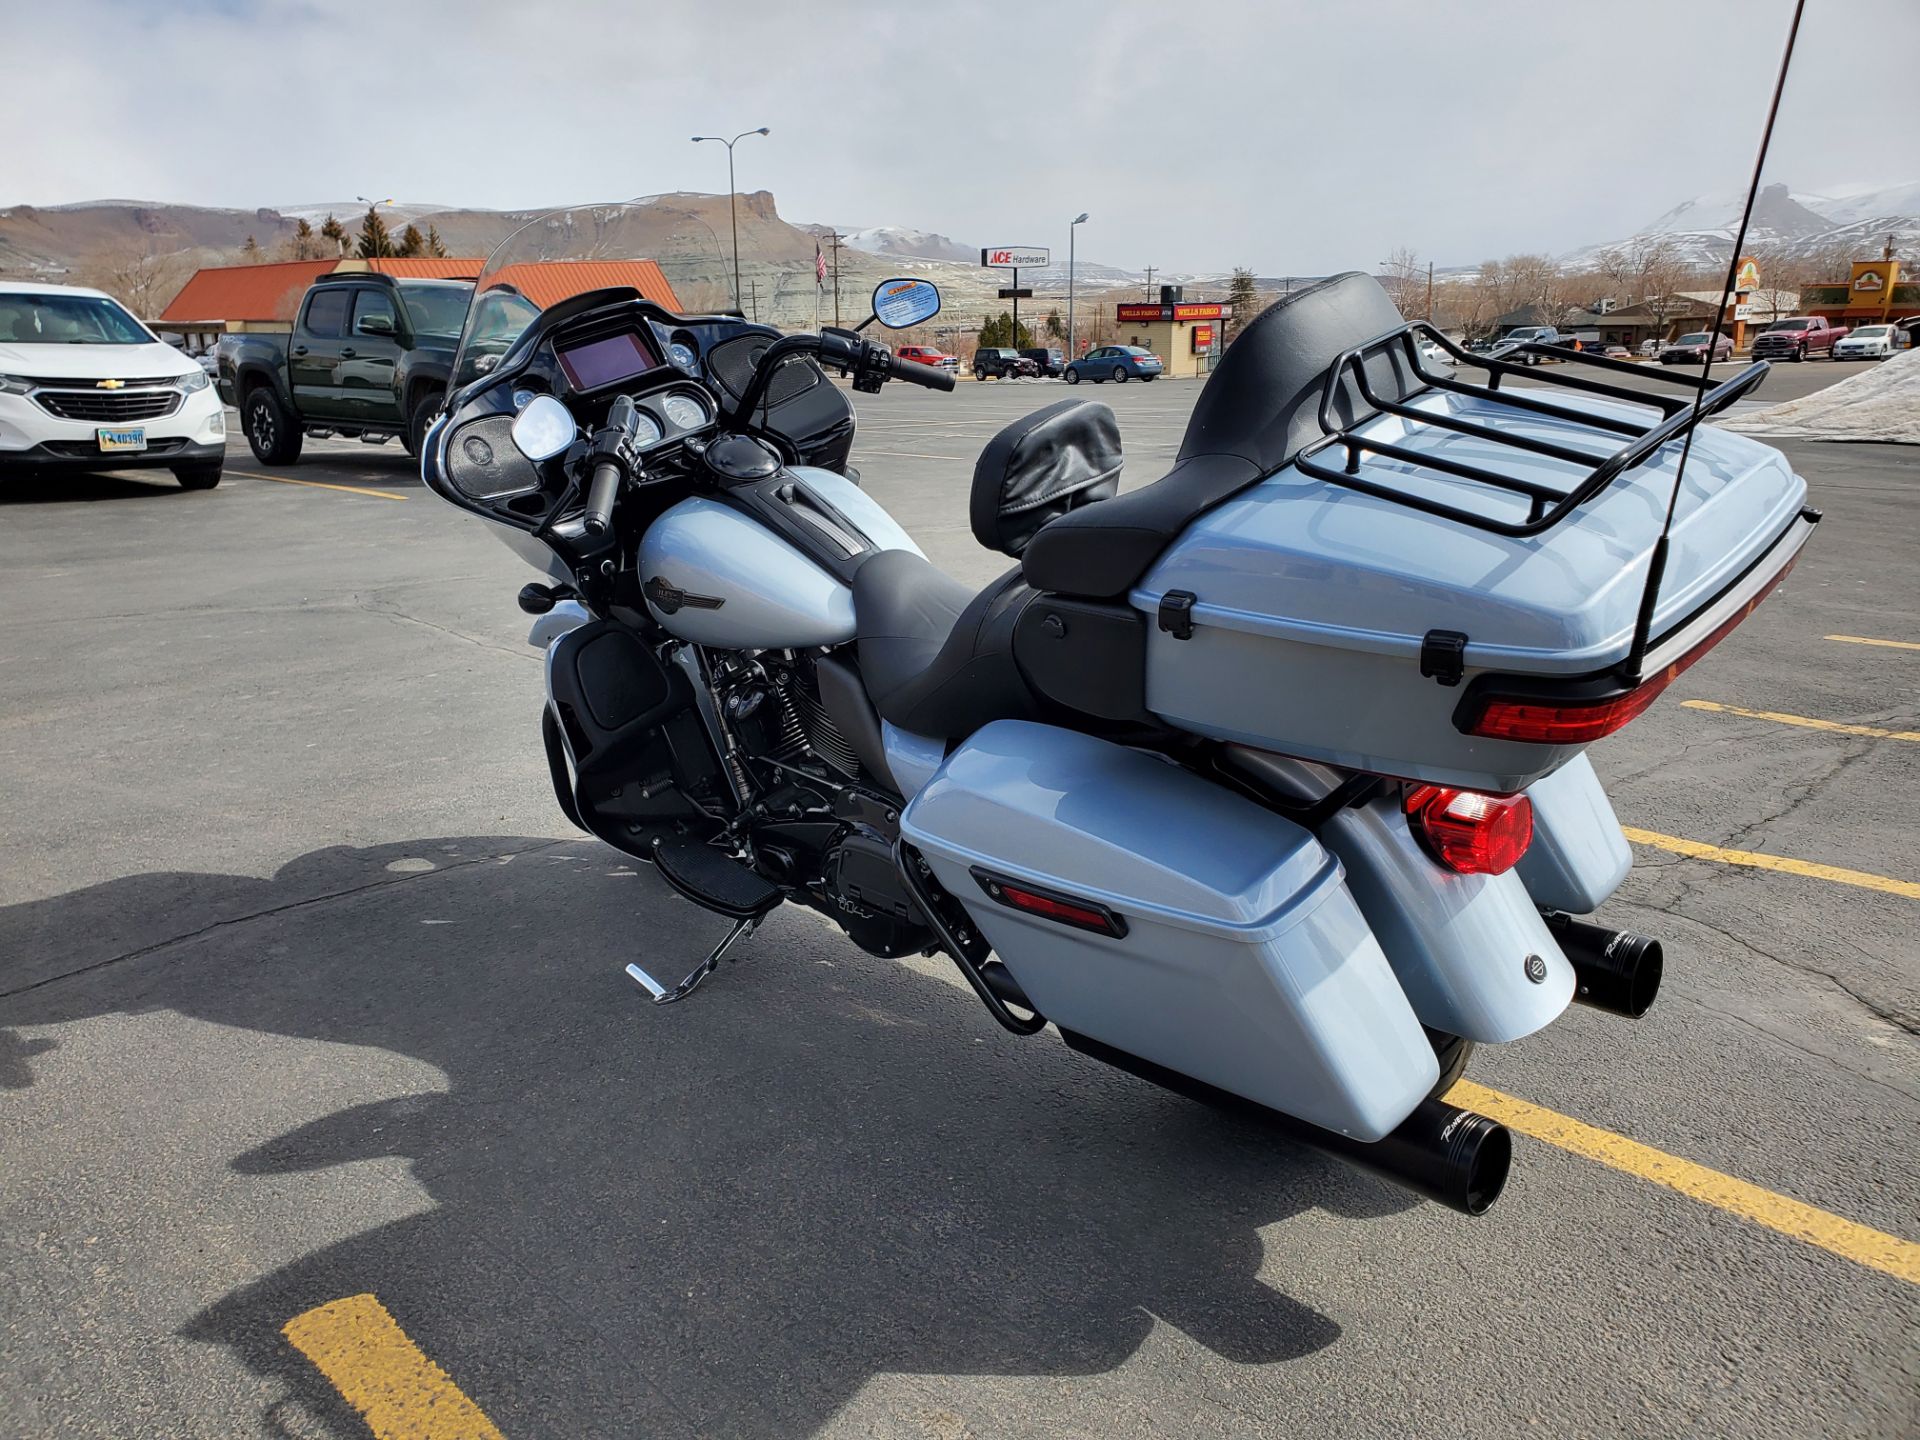 2023 Harley-Davidson Road Glide® Limited in Green River, Wyoming - Photo 4